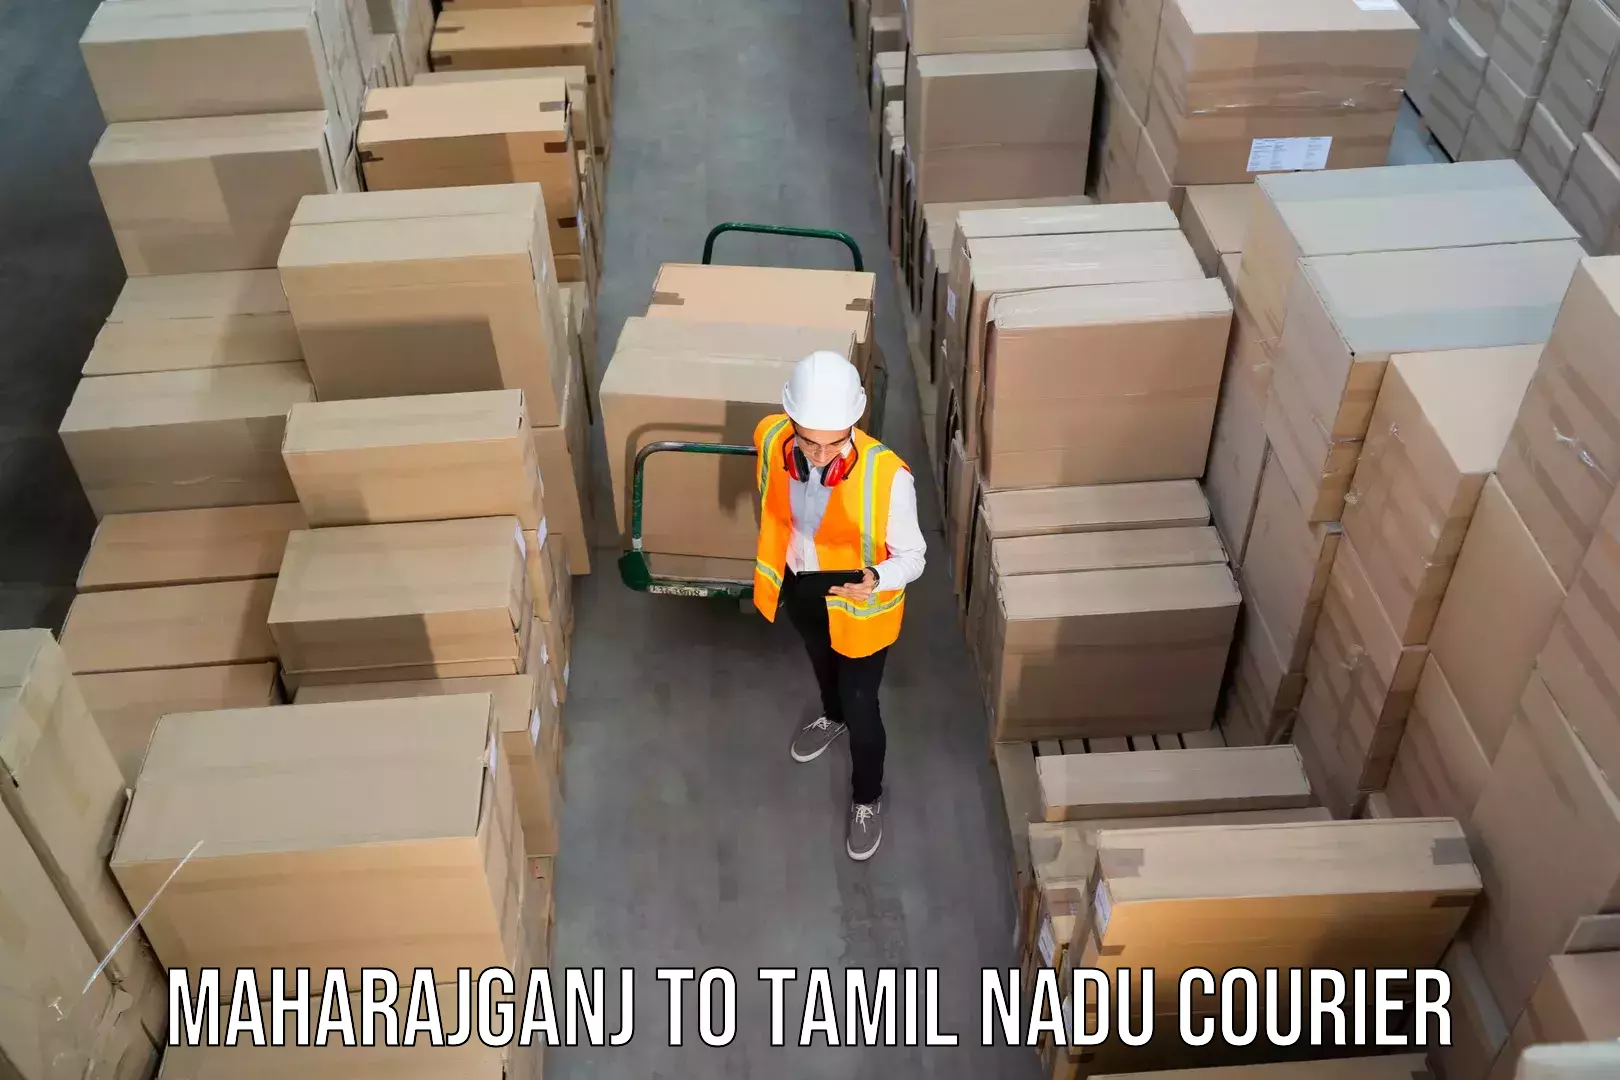 Easy access courier services Maharajganj to Ennore Port Chennai